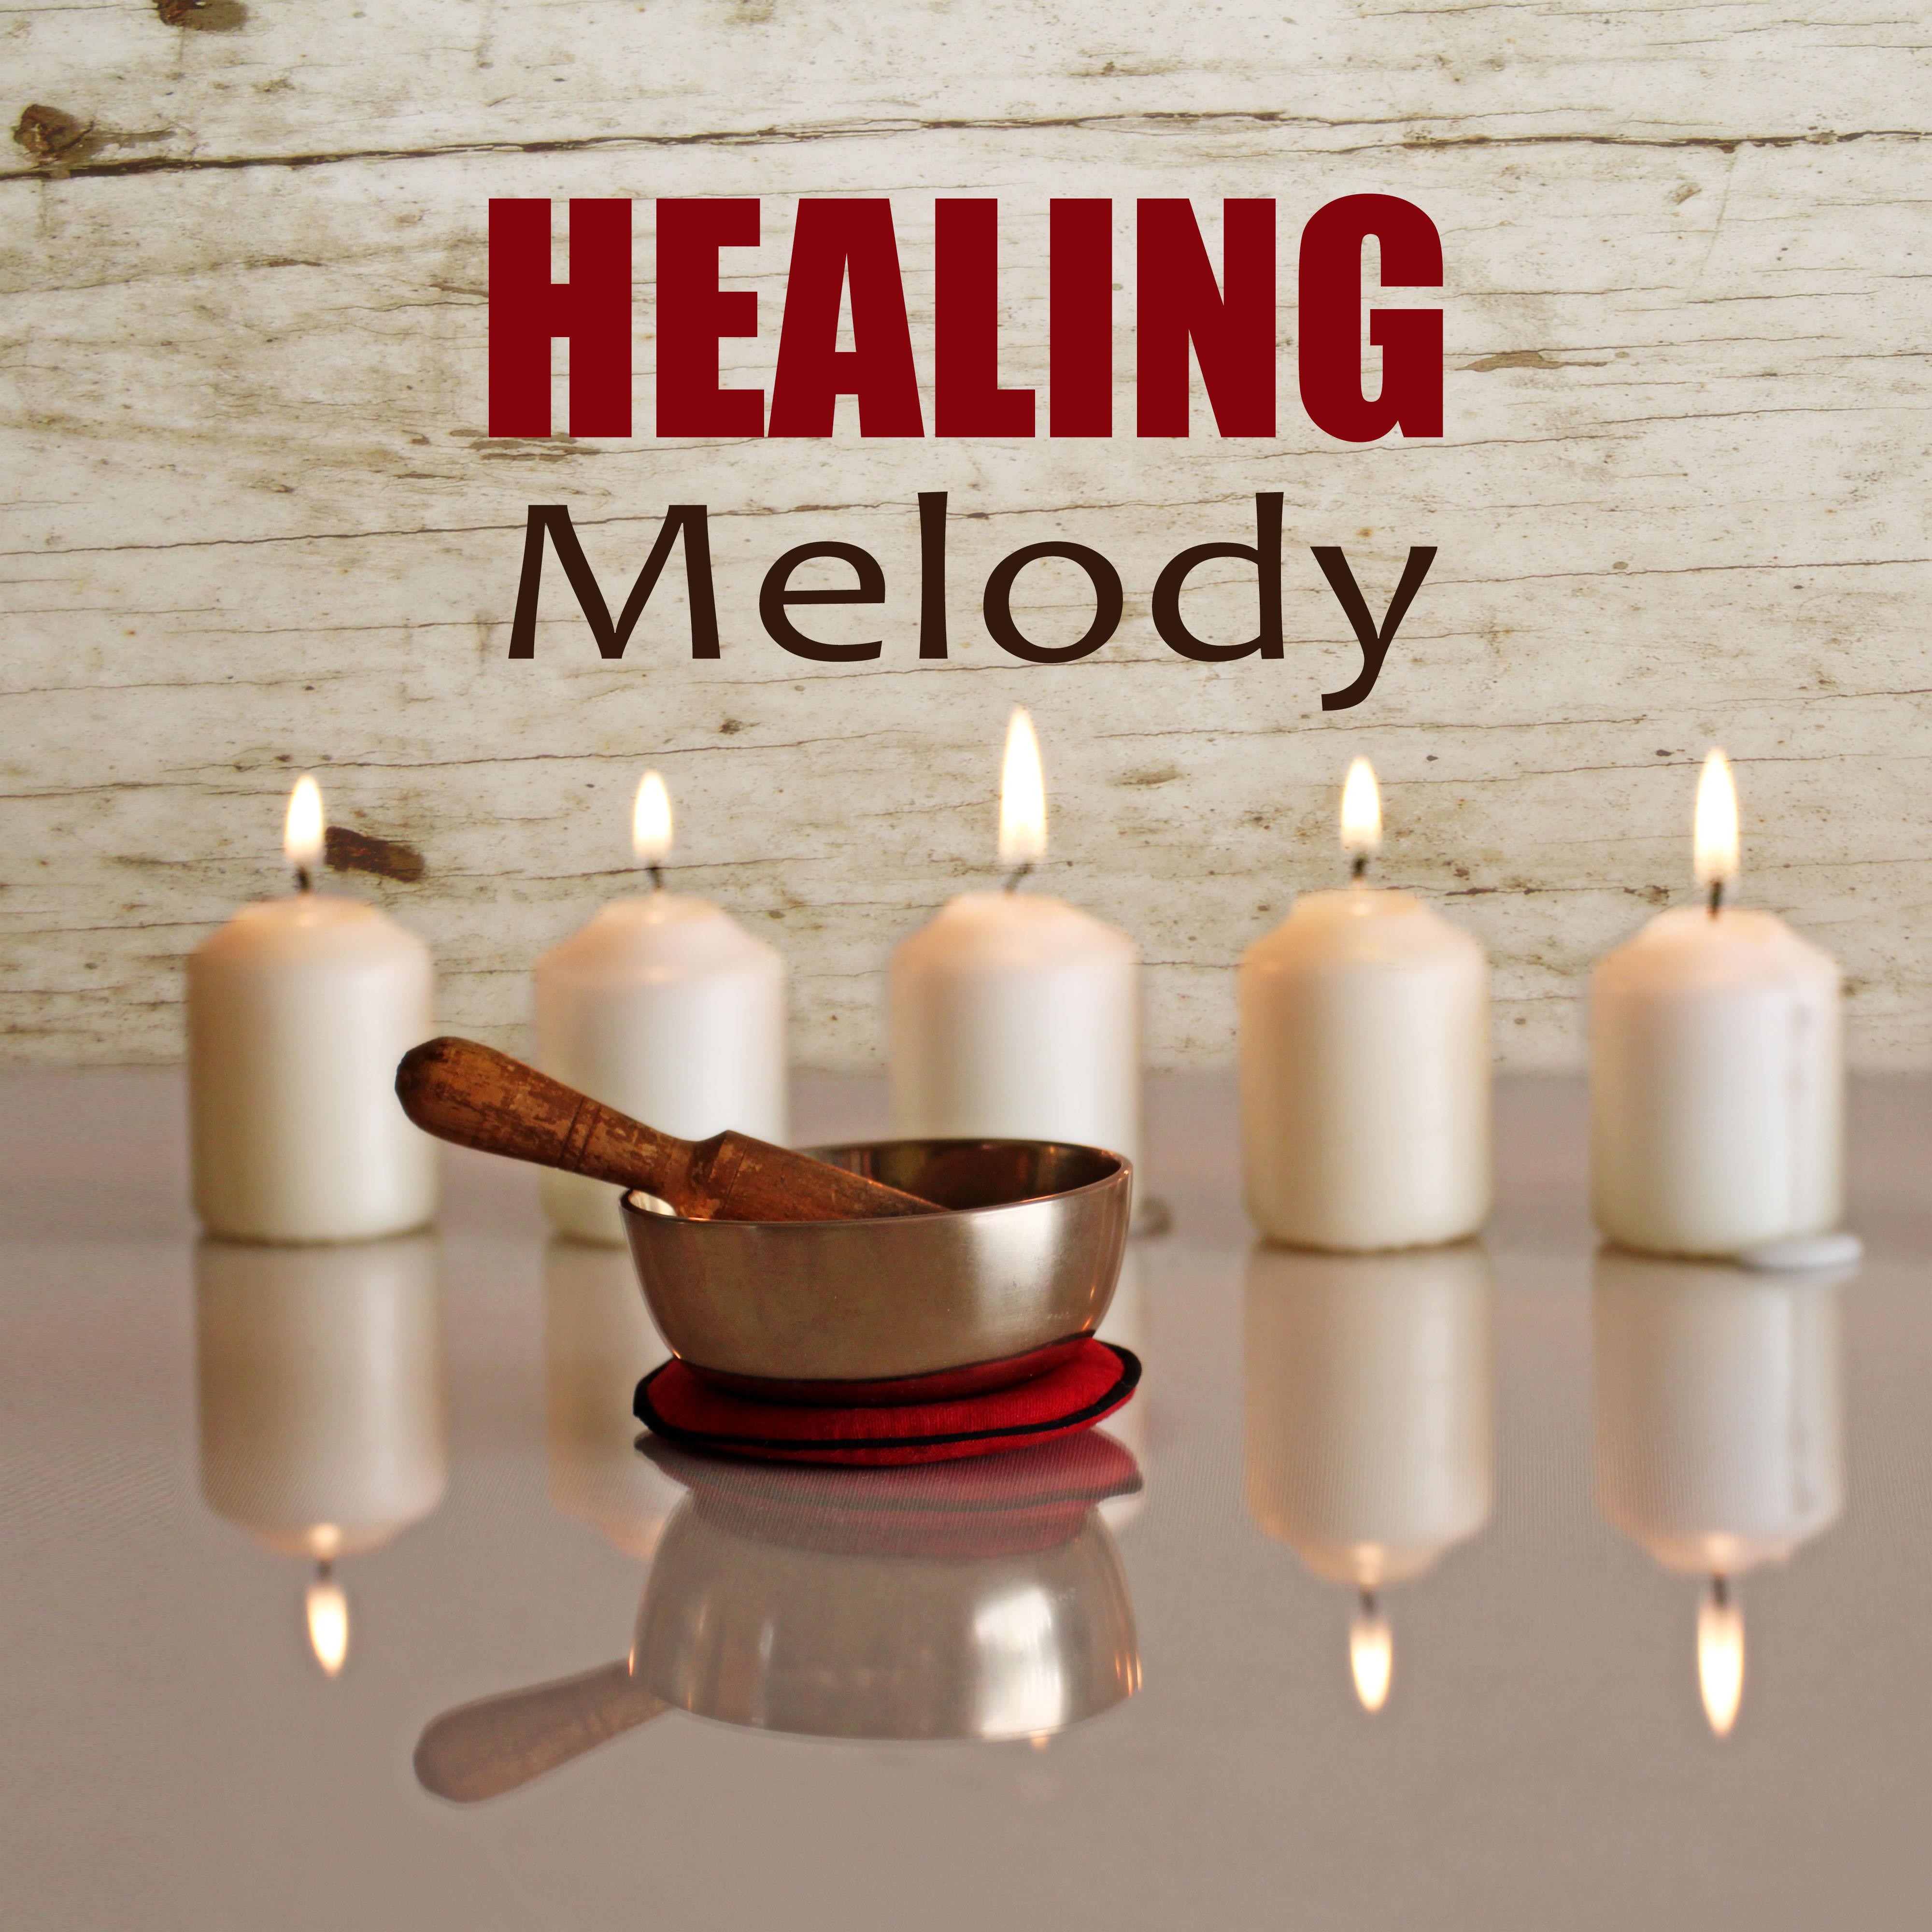 Healing Melody  Rest for a While, Meditation, Spa, Massage, Reiki Healing, Nature Sounds, White Noise